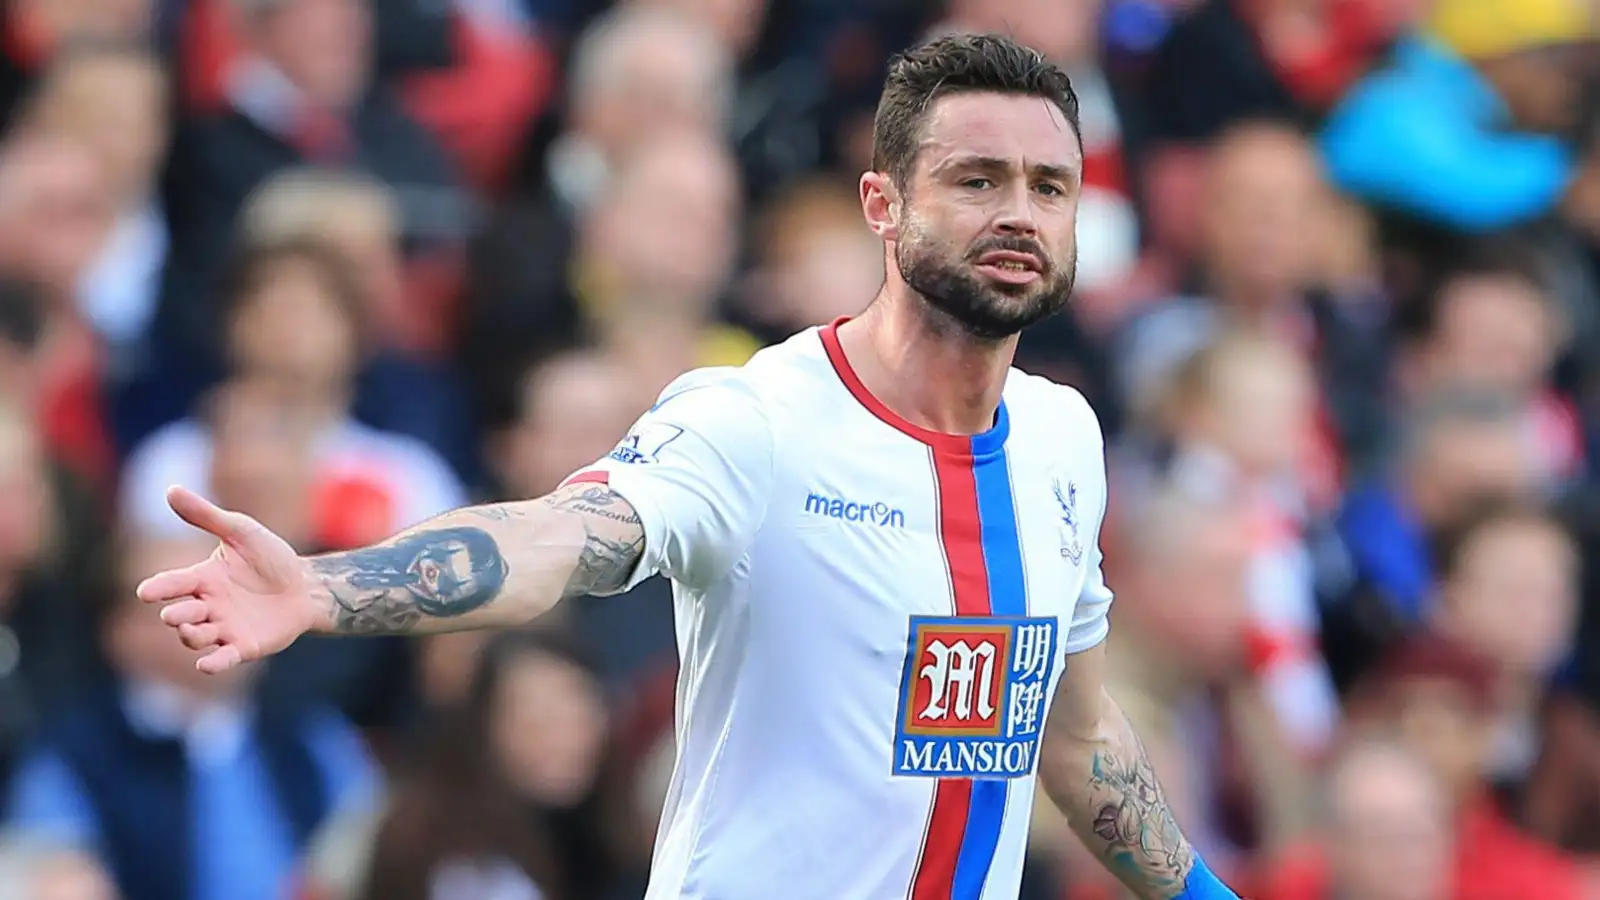 An ode to Damien Delaney and the best footballer interview of all-time